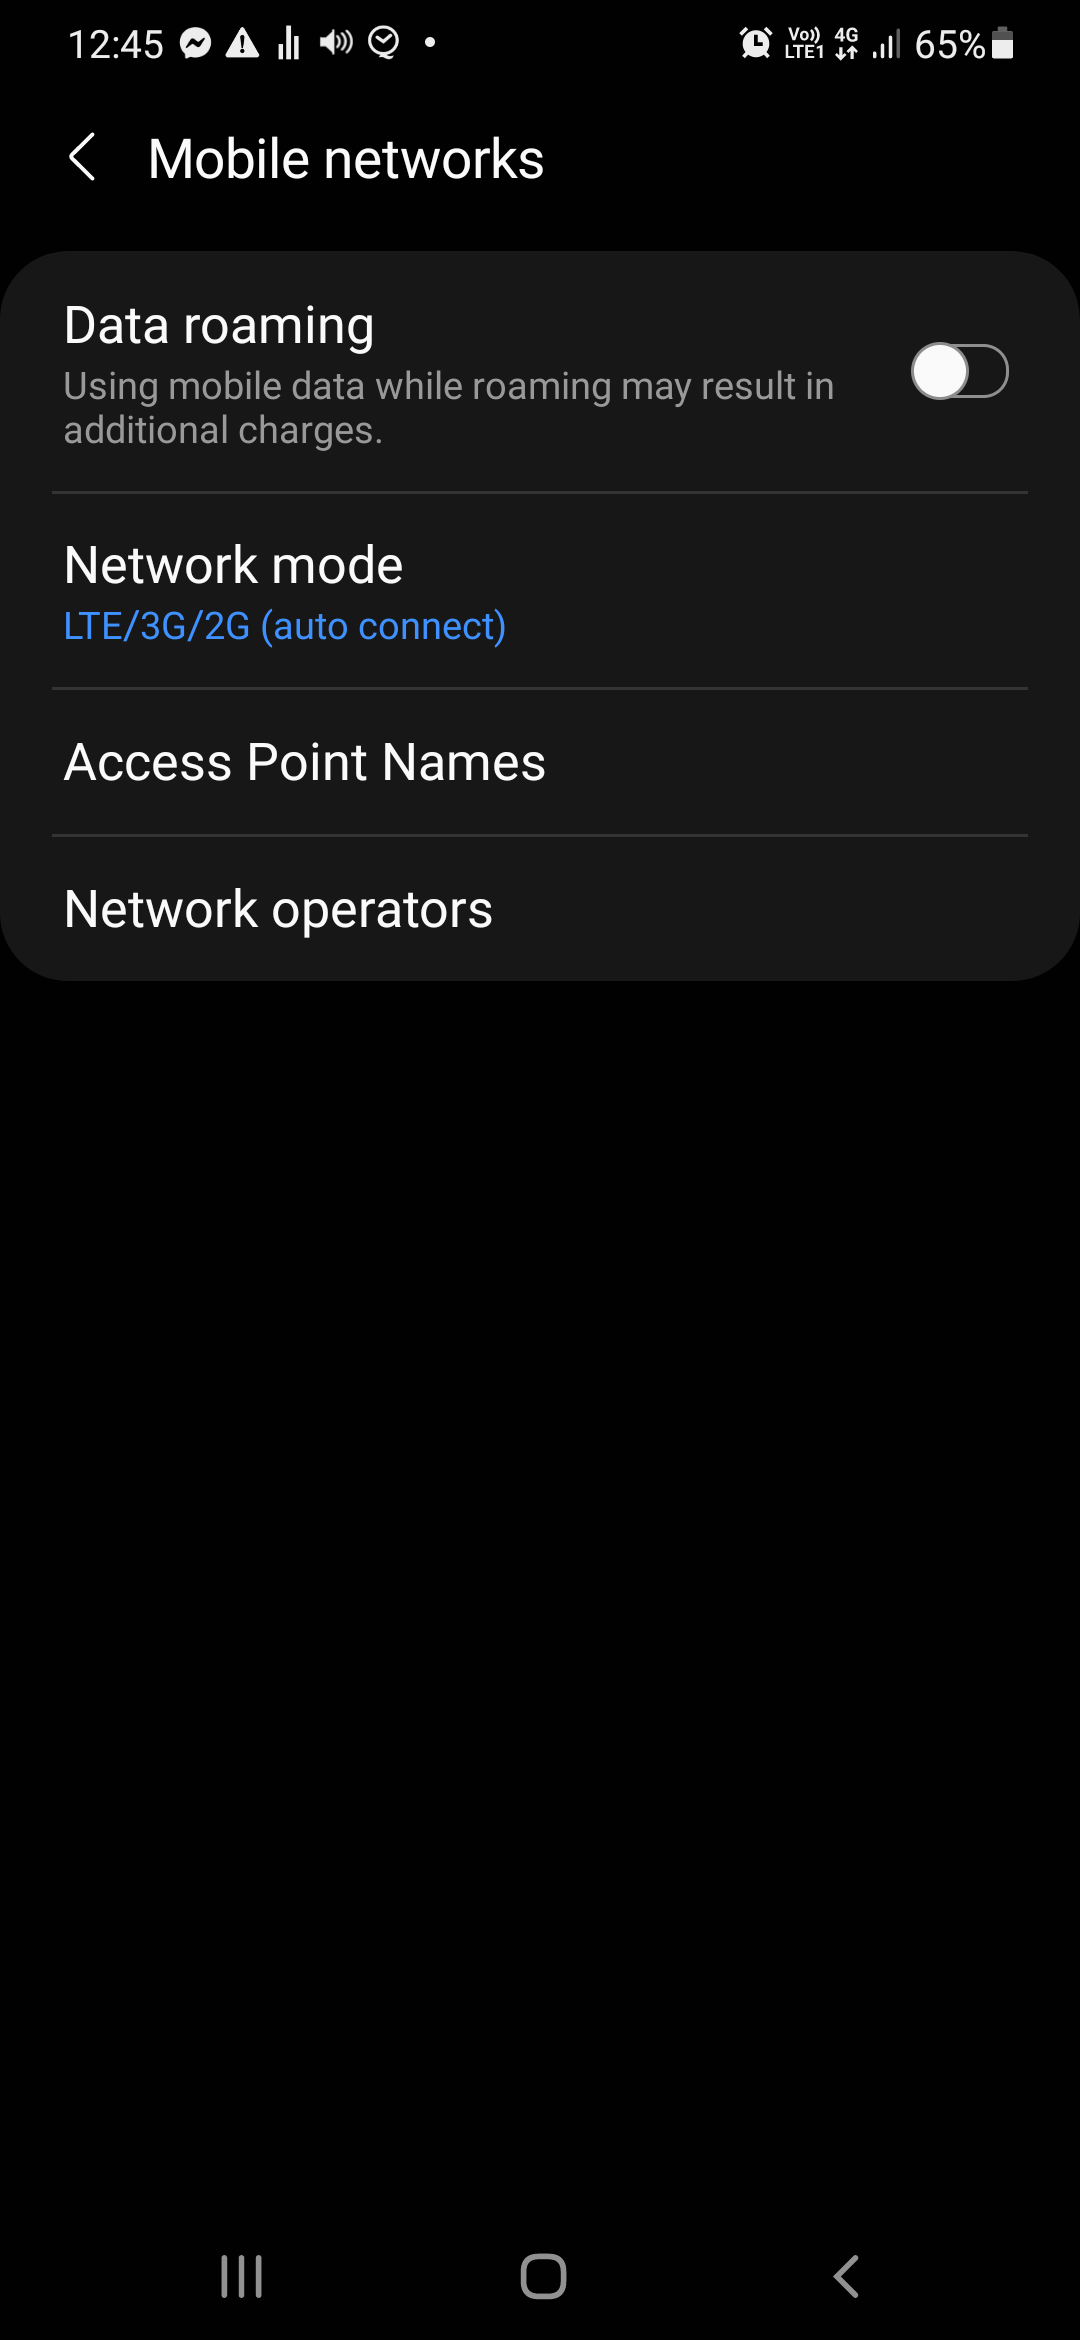 M21 how to turn off VoLTE - Samsung Members